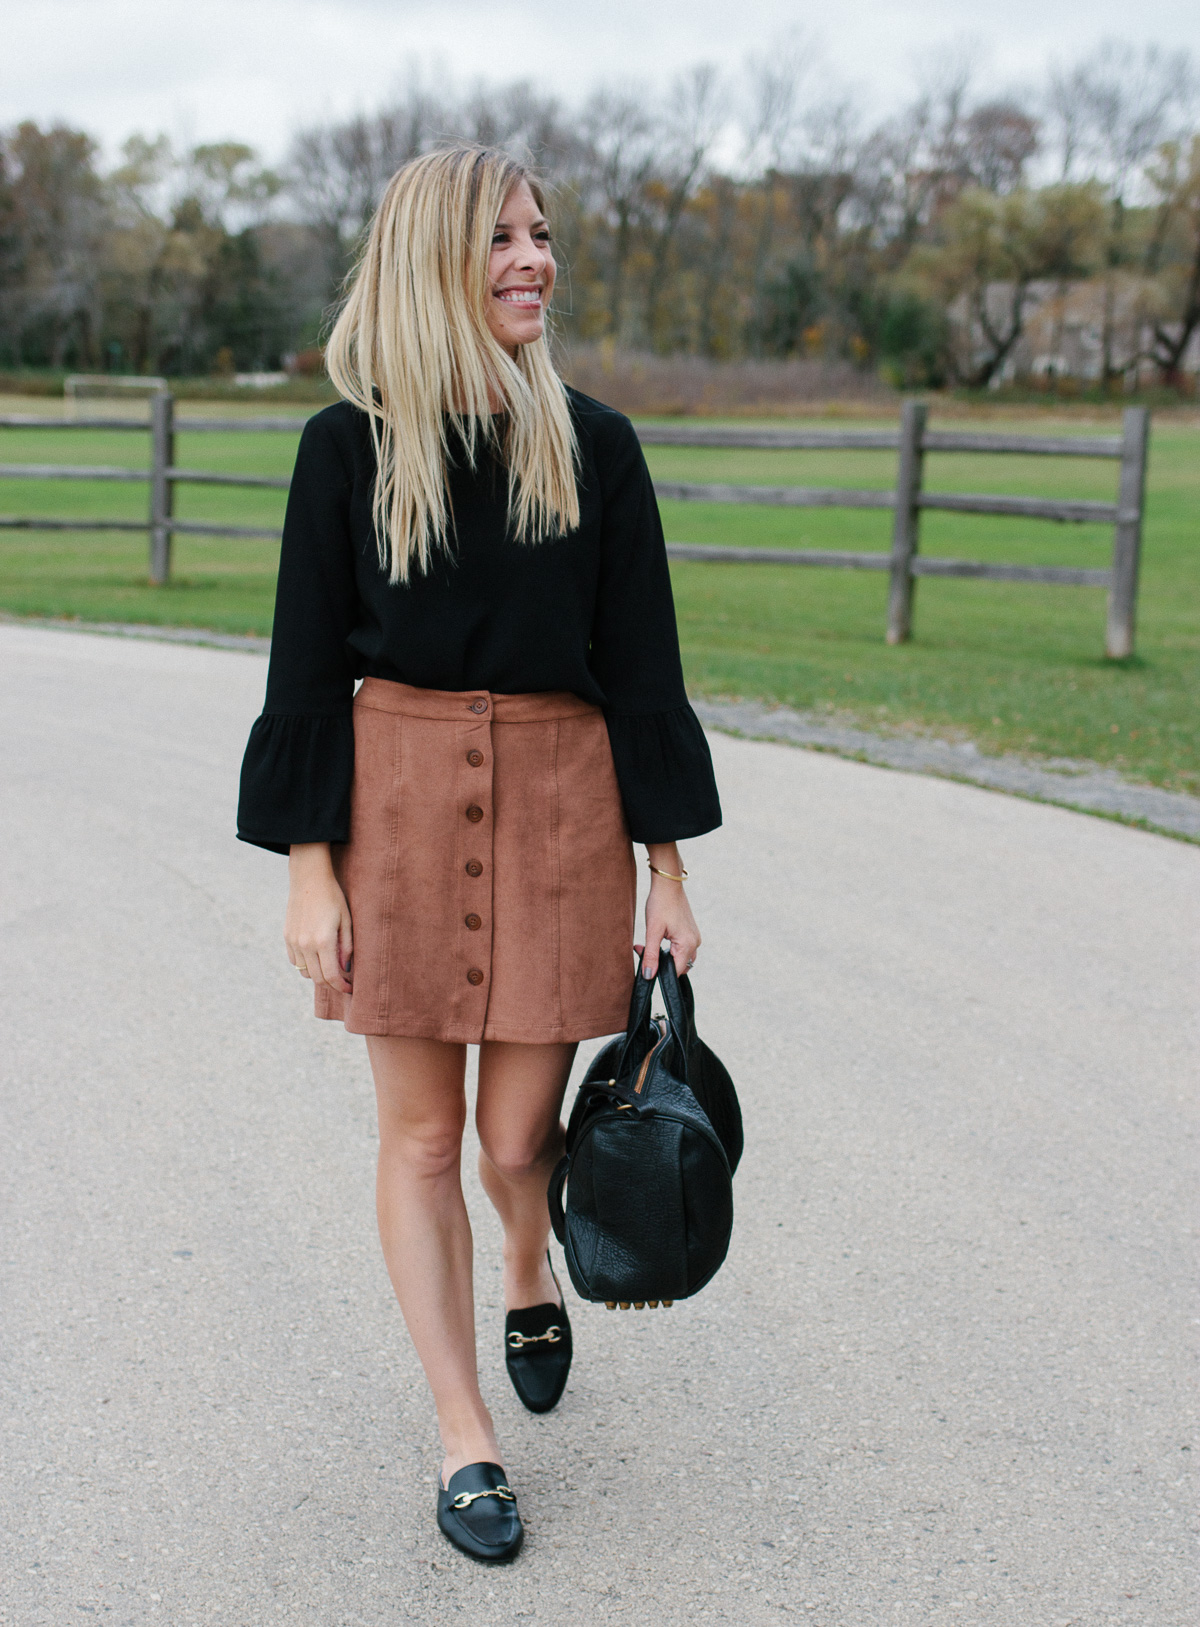 Suede Skirt and Black Loafers